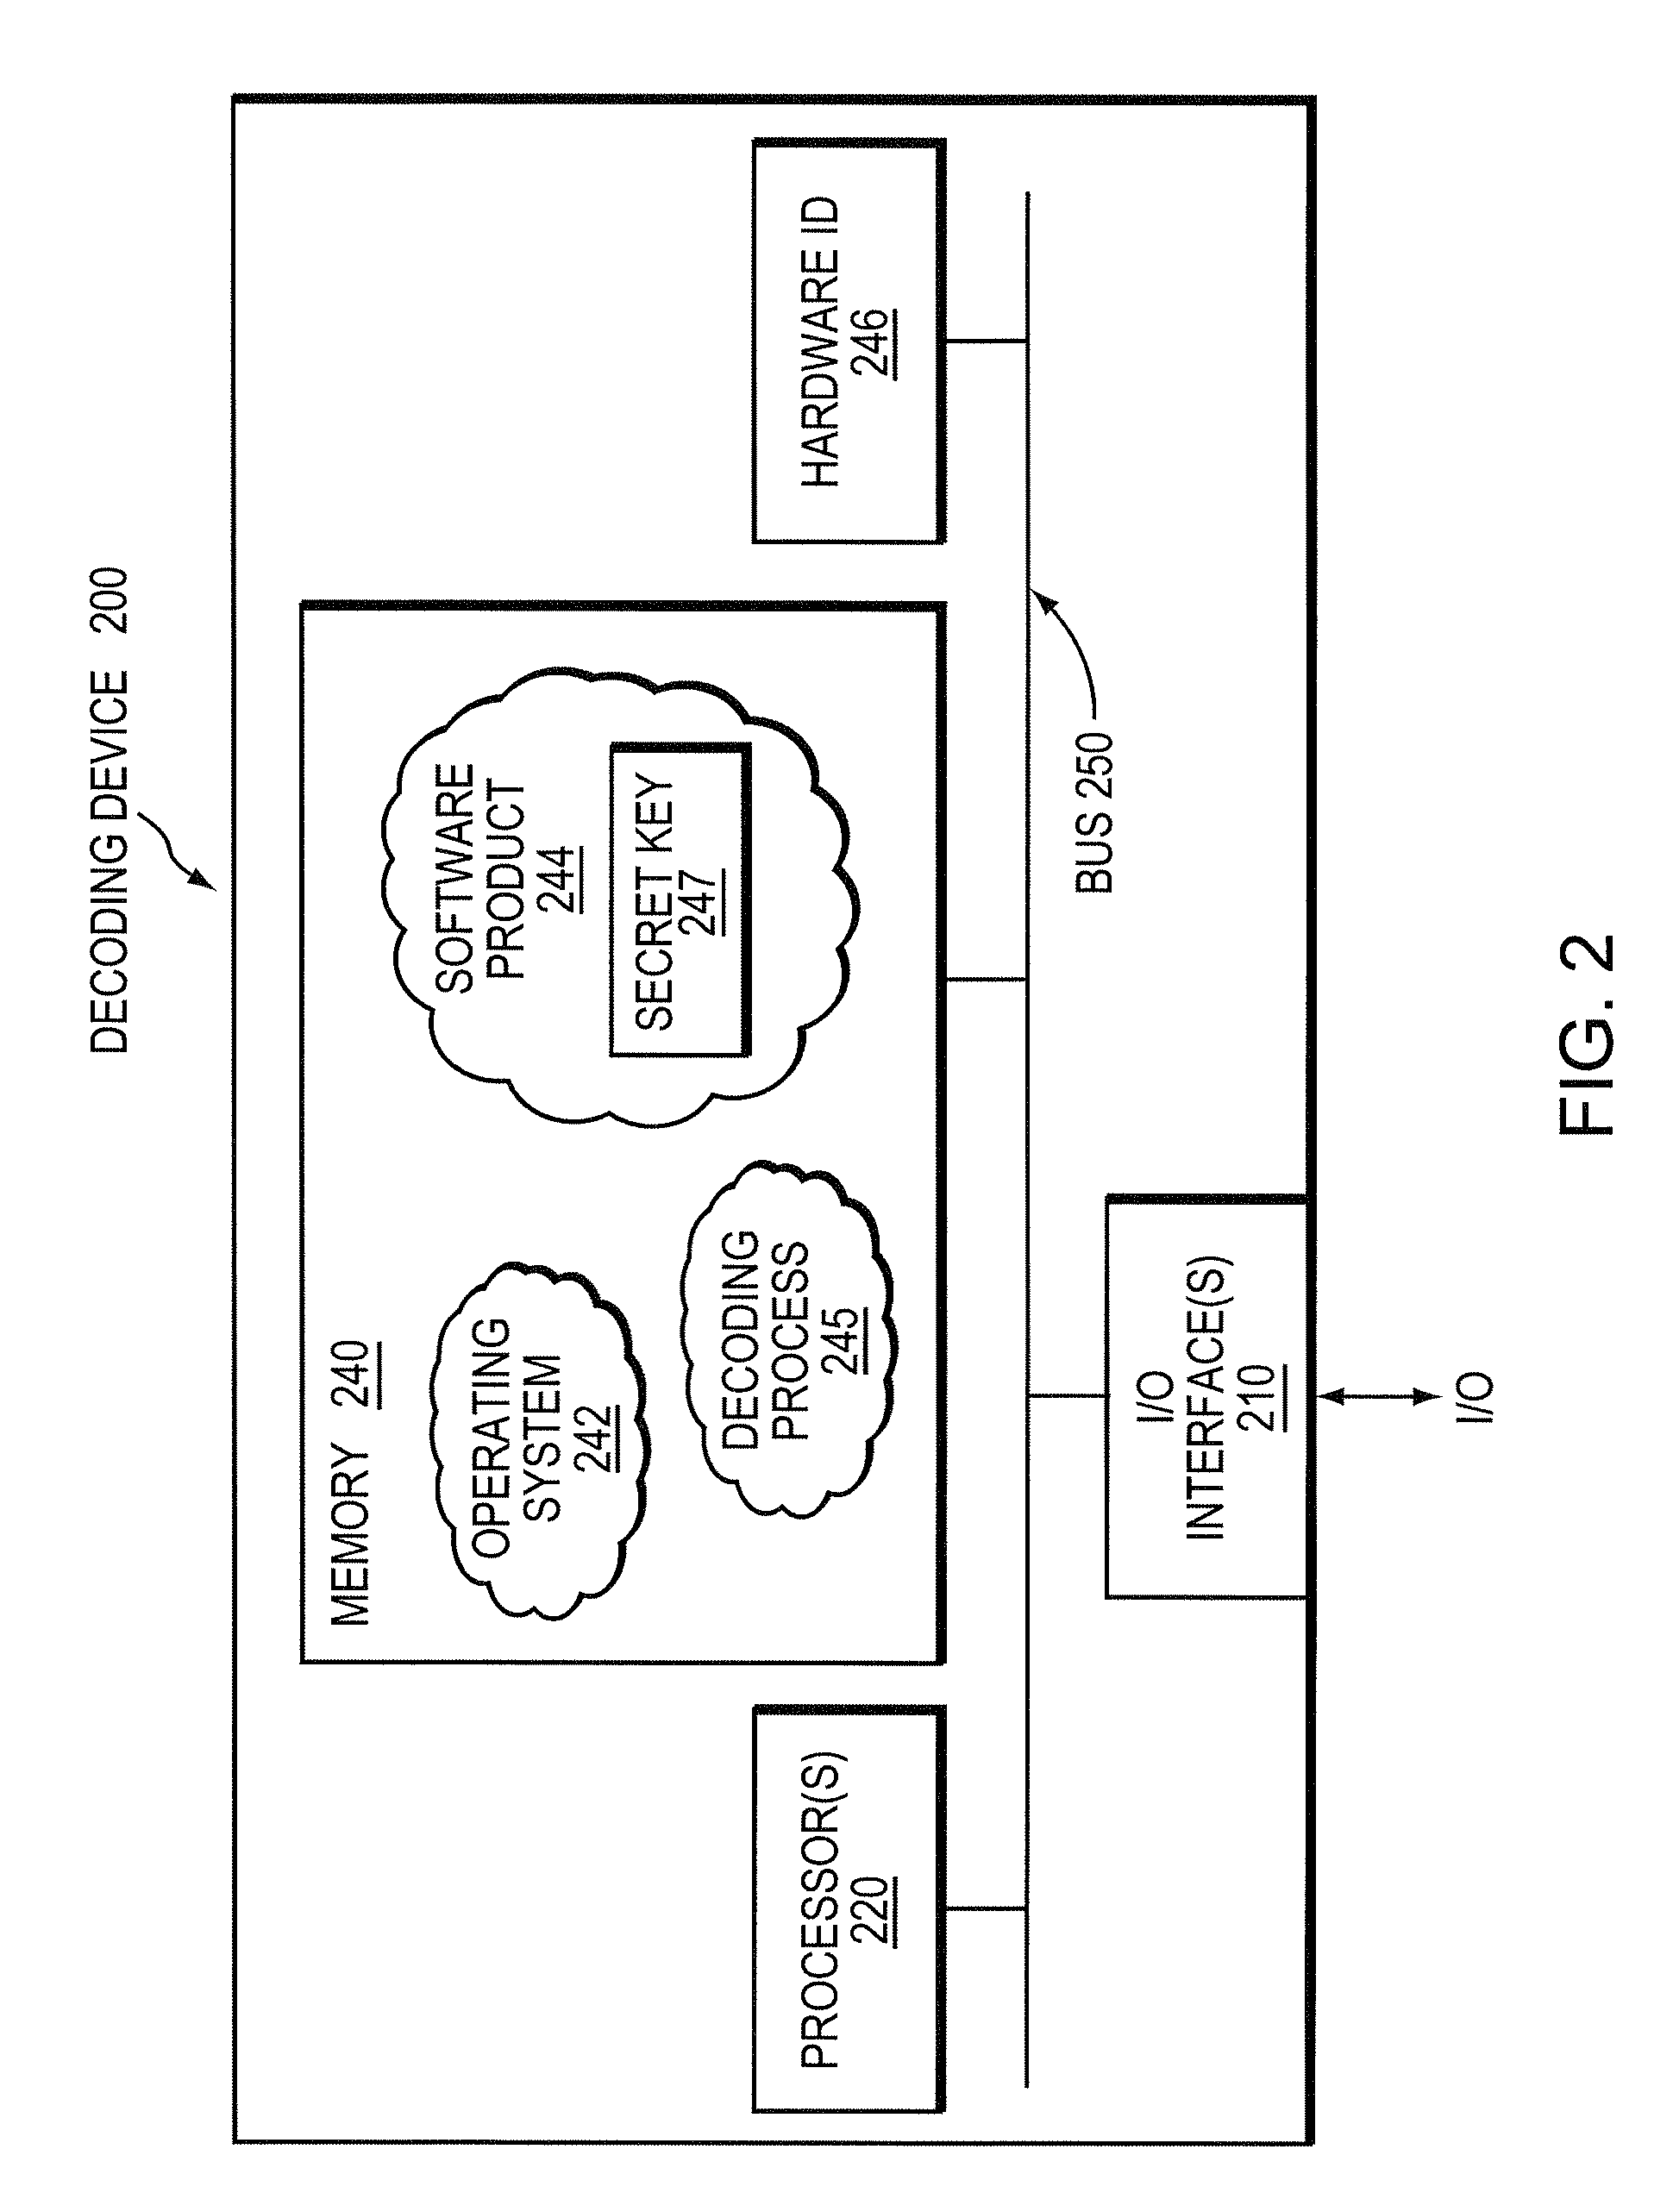 Generating and interpreting secure and system dependent software license keys